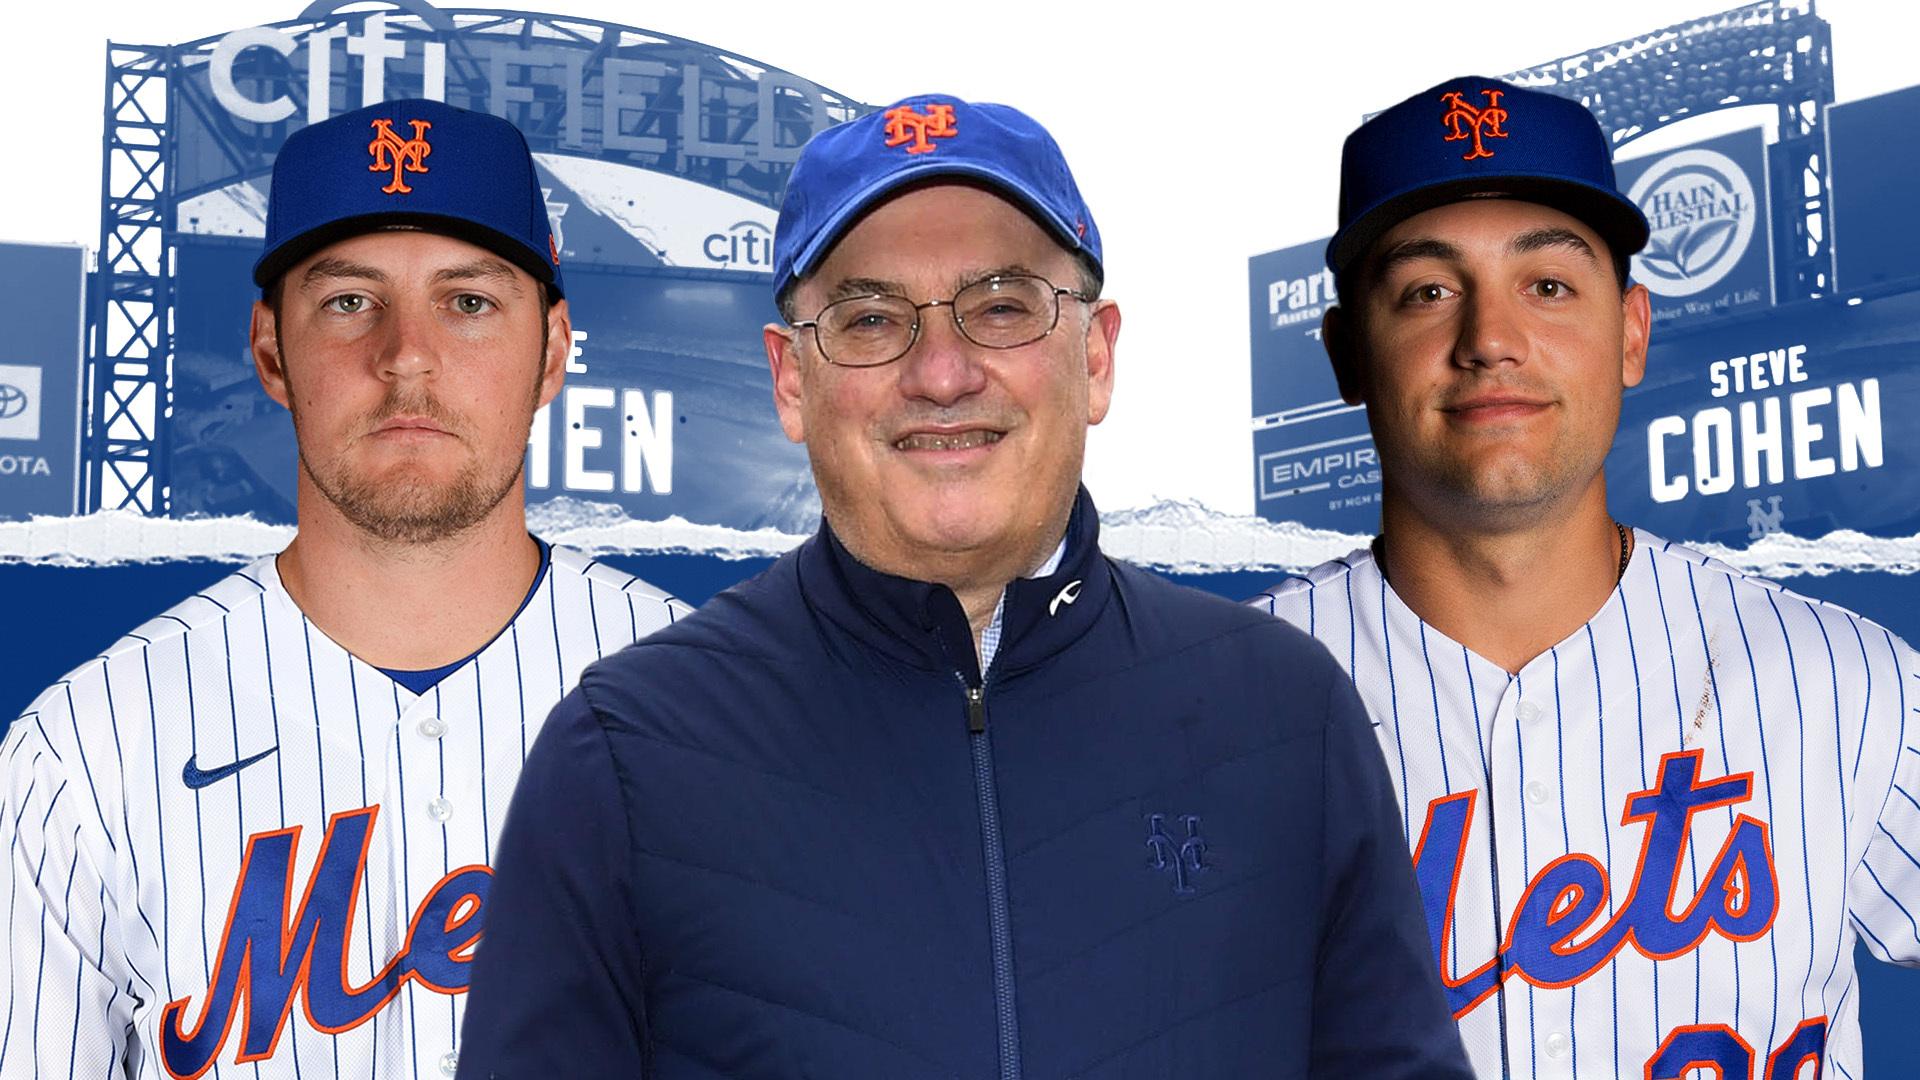 Trevor Bauer, Steve Cohen, and Michael Conforto / SNY treated image